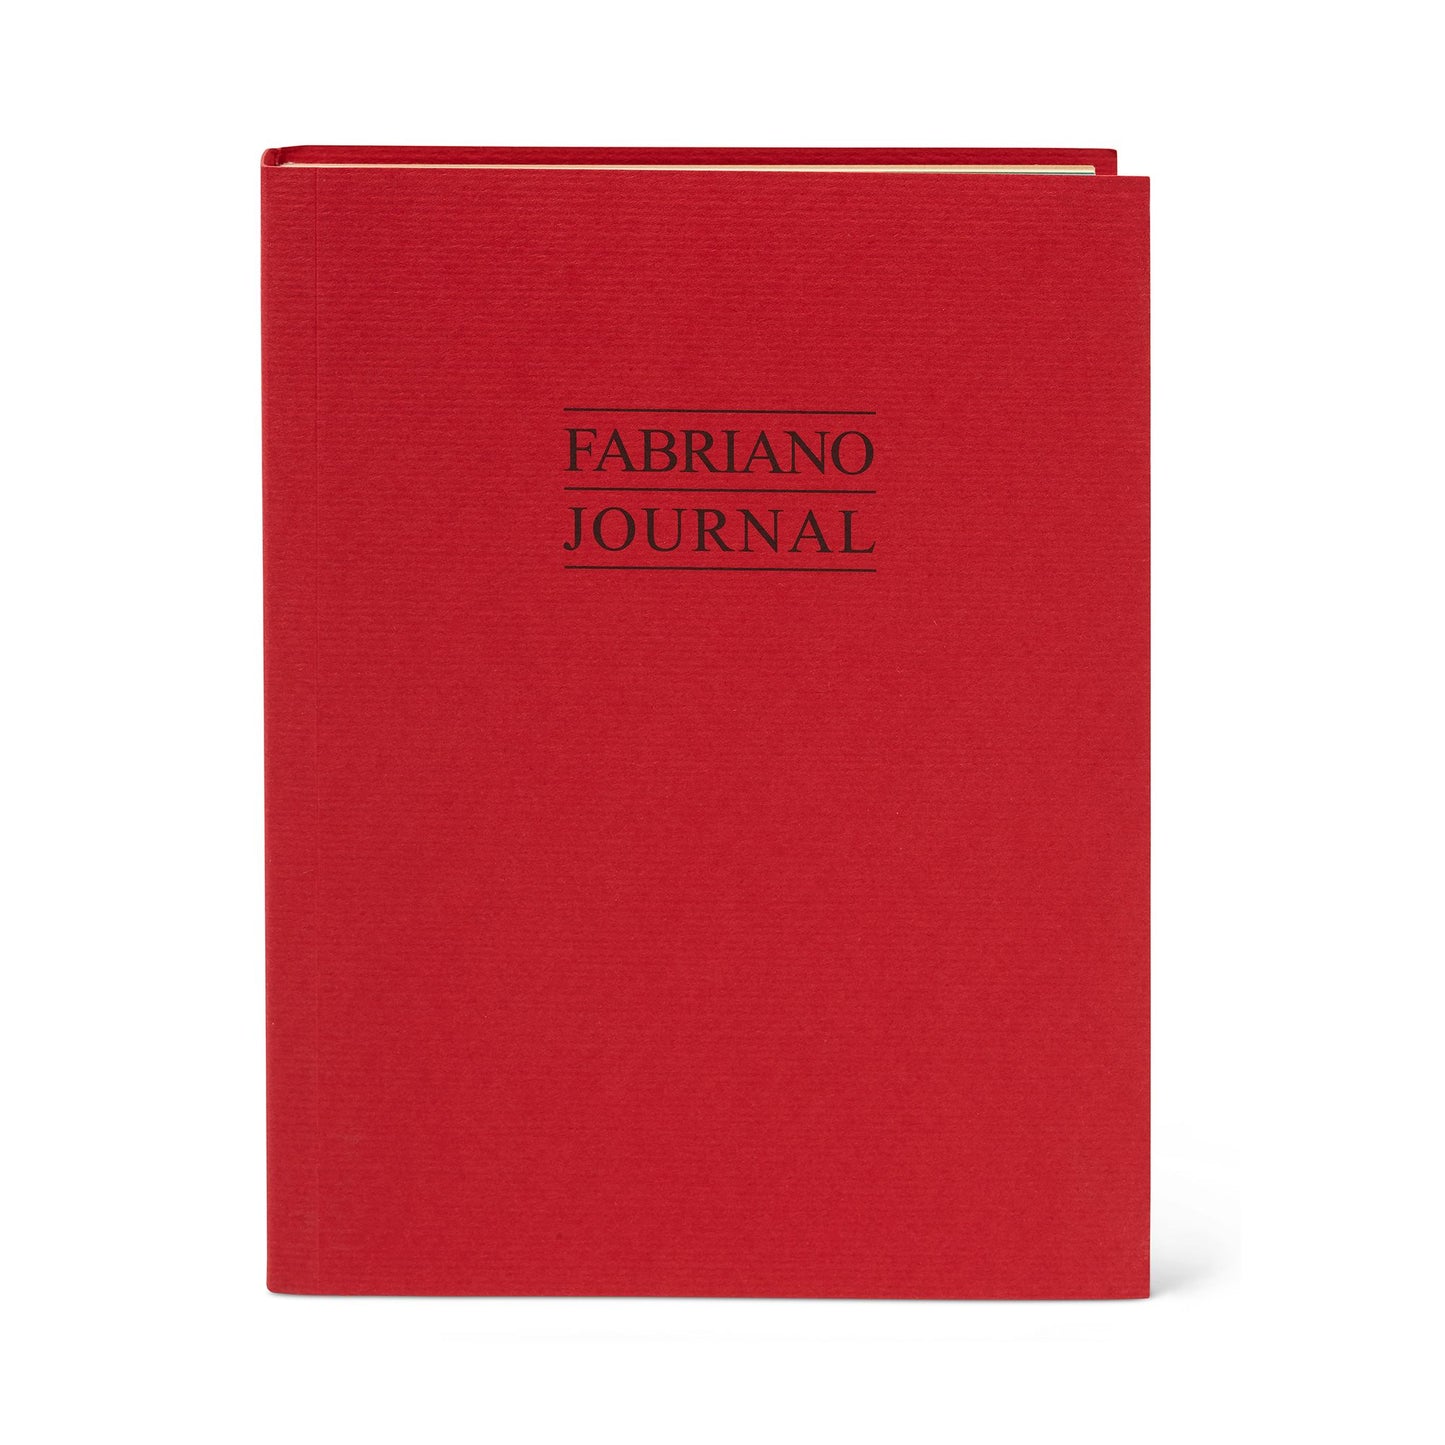 Fabriano drawing notebook | Multicoloured paper